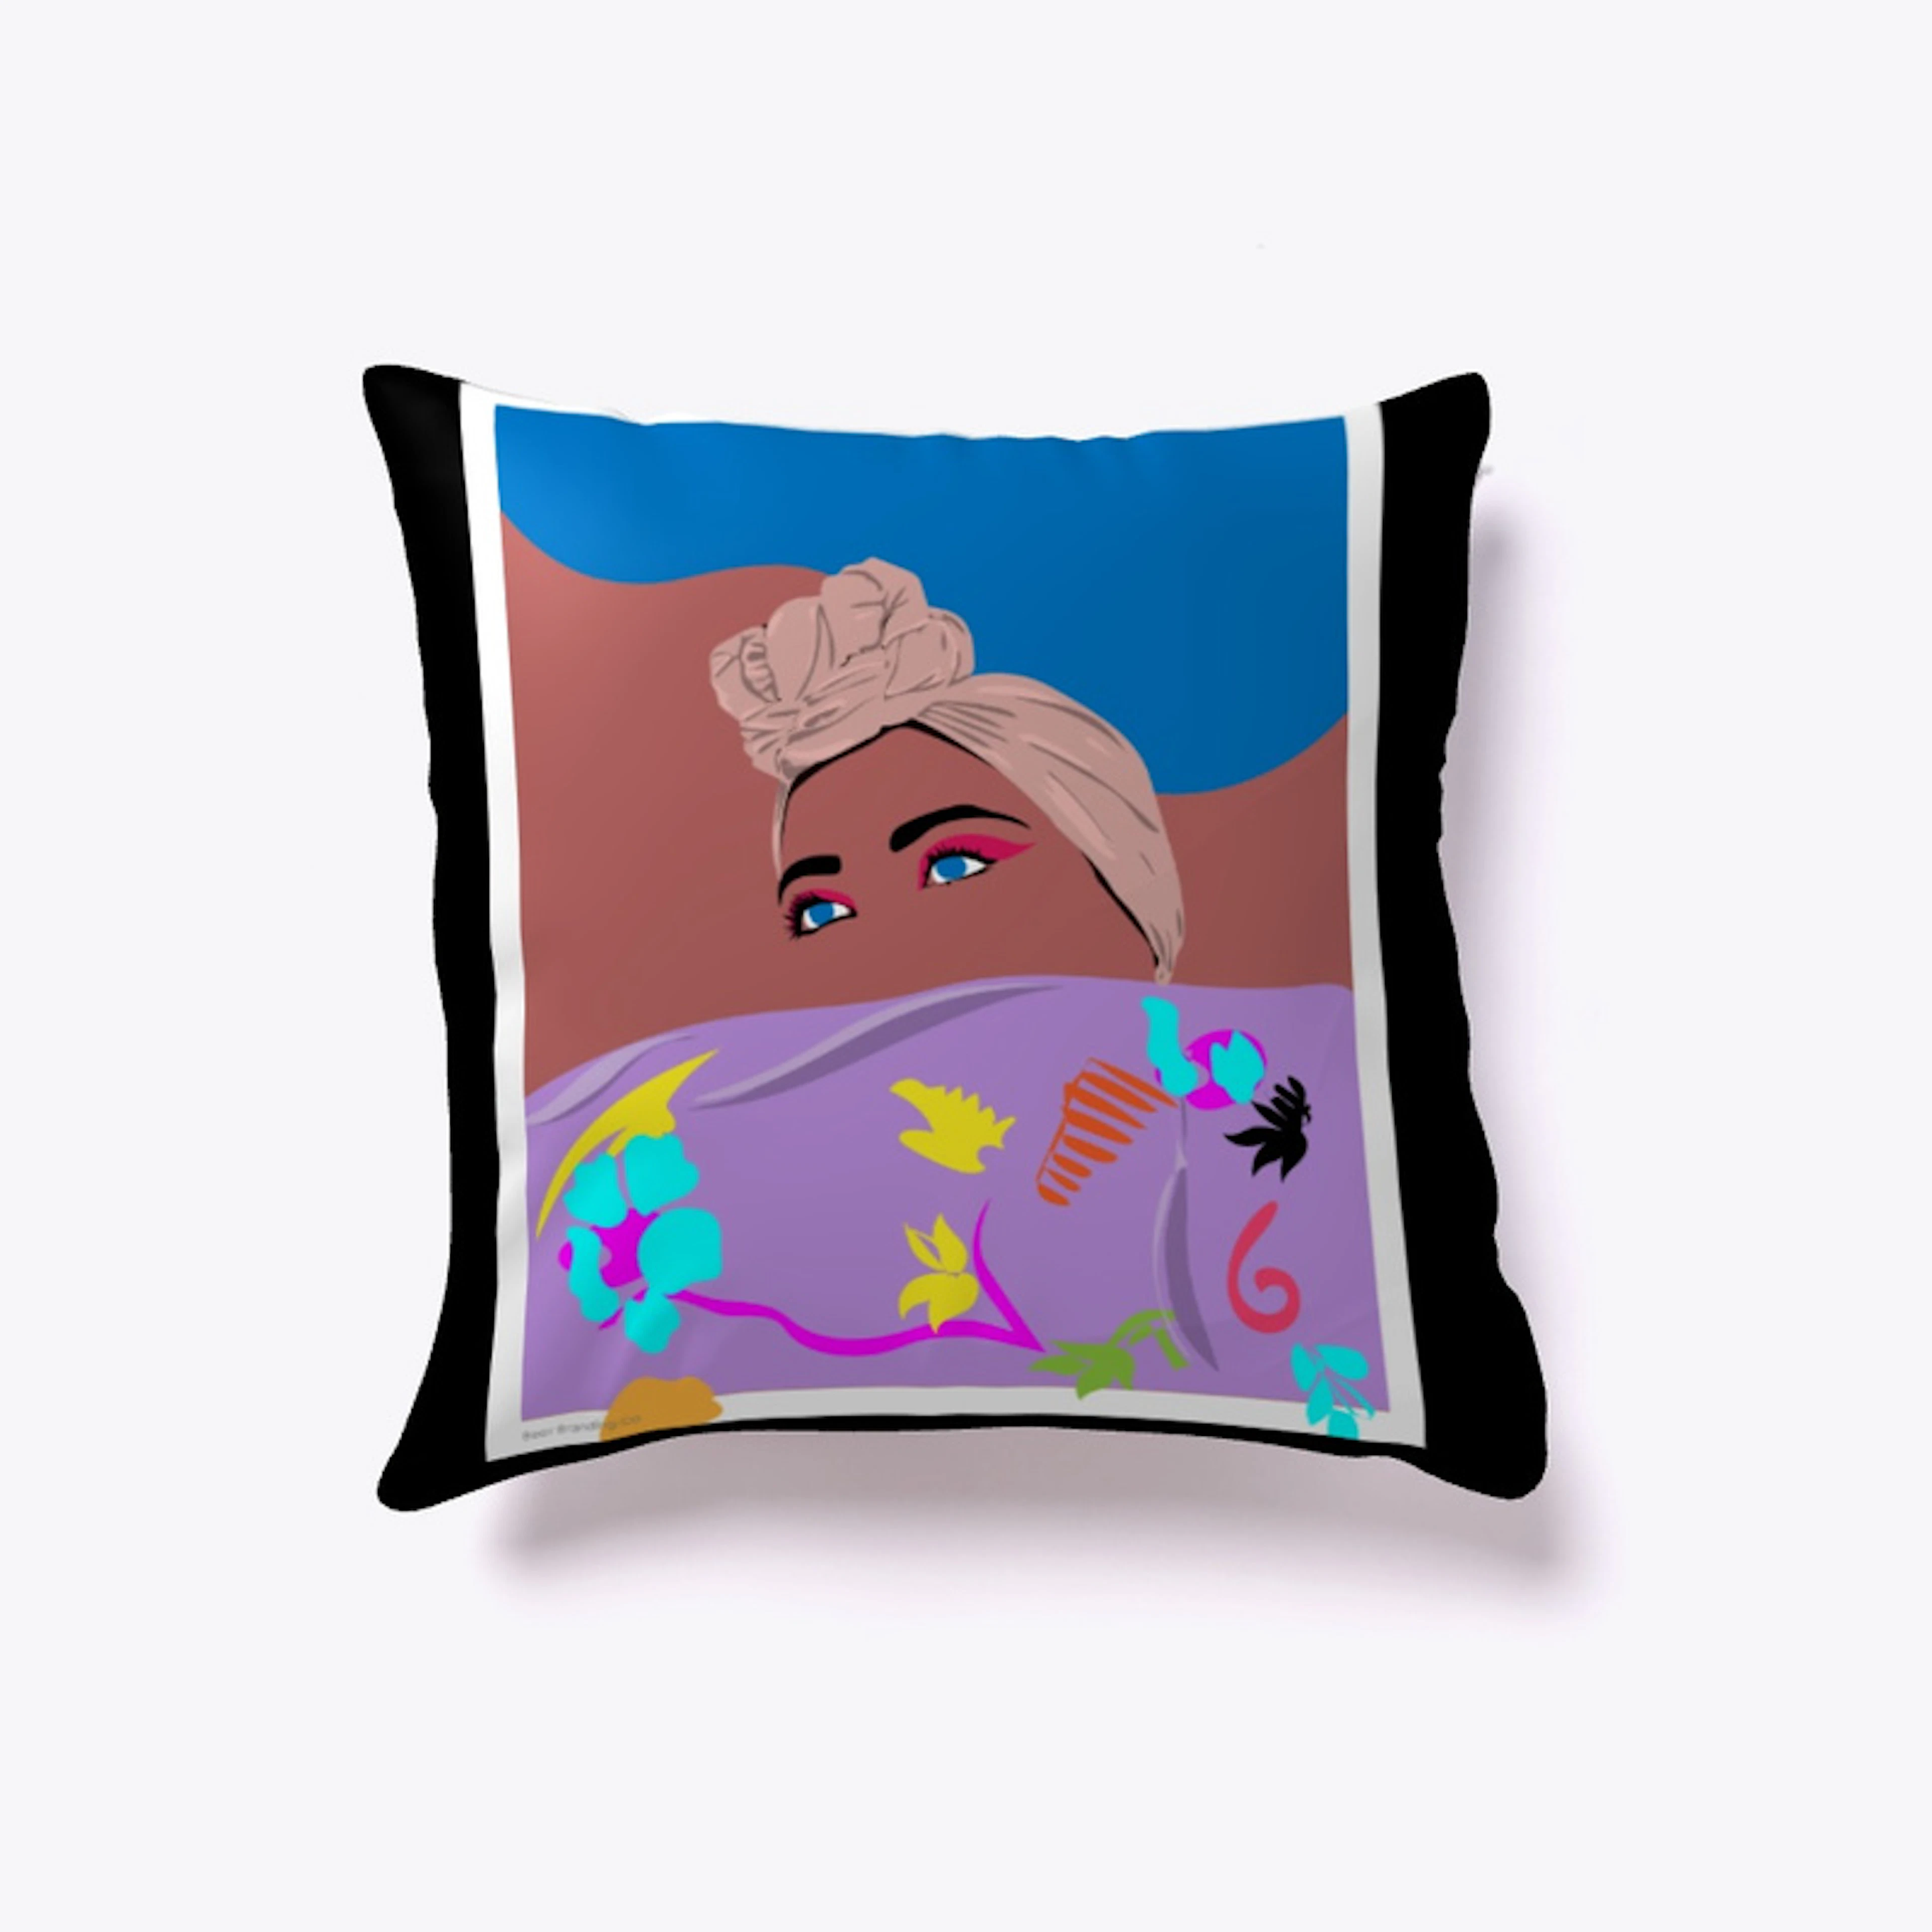 'BEAUTY' - Double-Sided Pillow